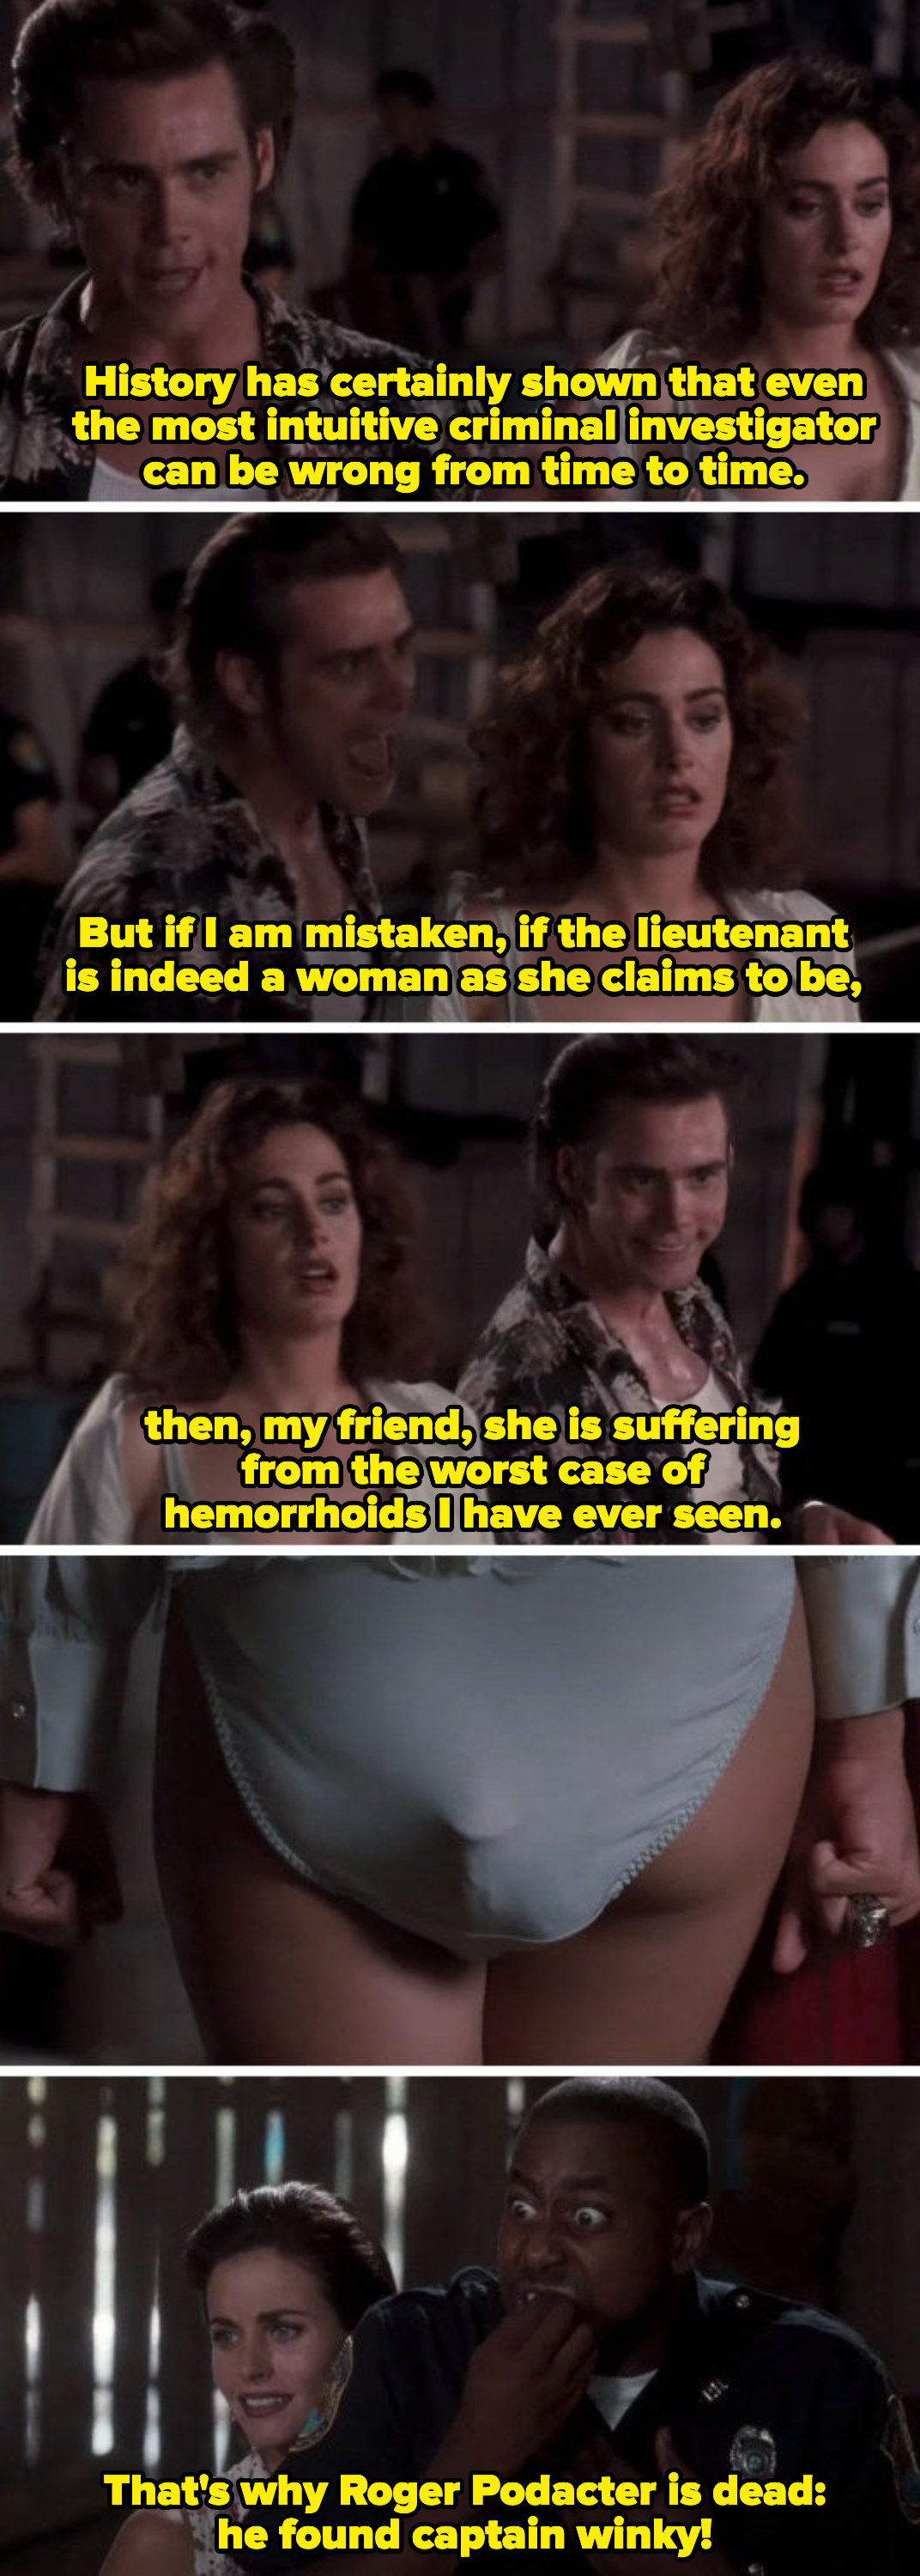 Ace Ventura outing Lt. Einhorn as transgender in an insensitive way, saying: &quot;But if I am mistaken, if the lieutenant is indeed a woman as she claims to be, then she&#x27;s suffering from the worst case of hemorrhoids I have ever seen&quot;